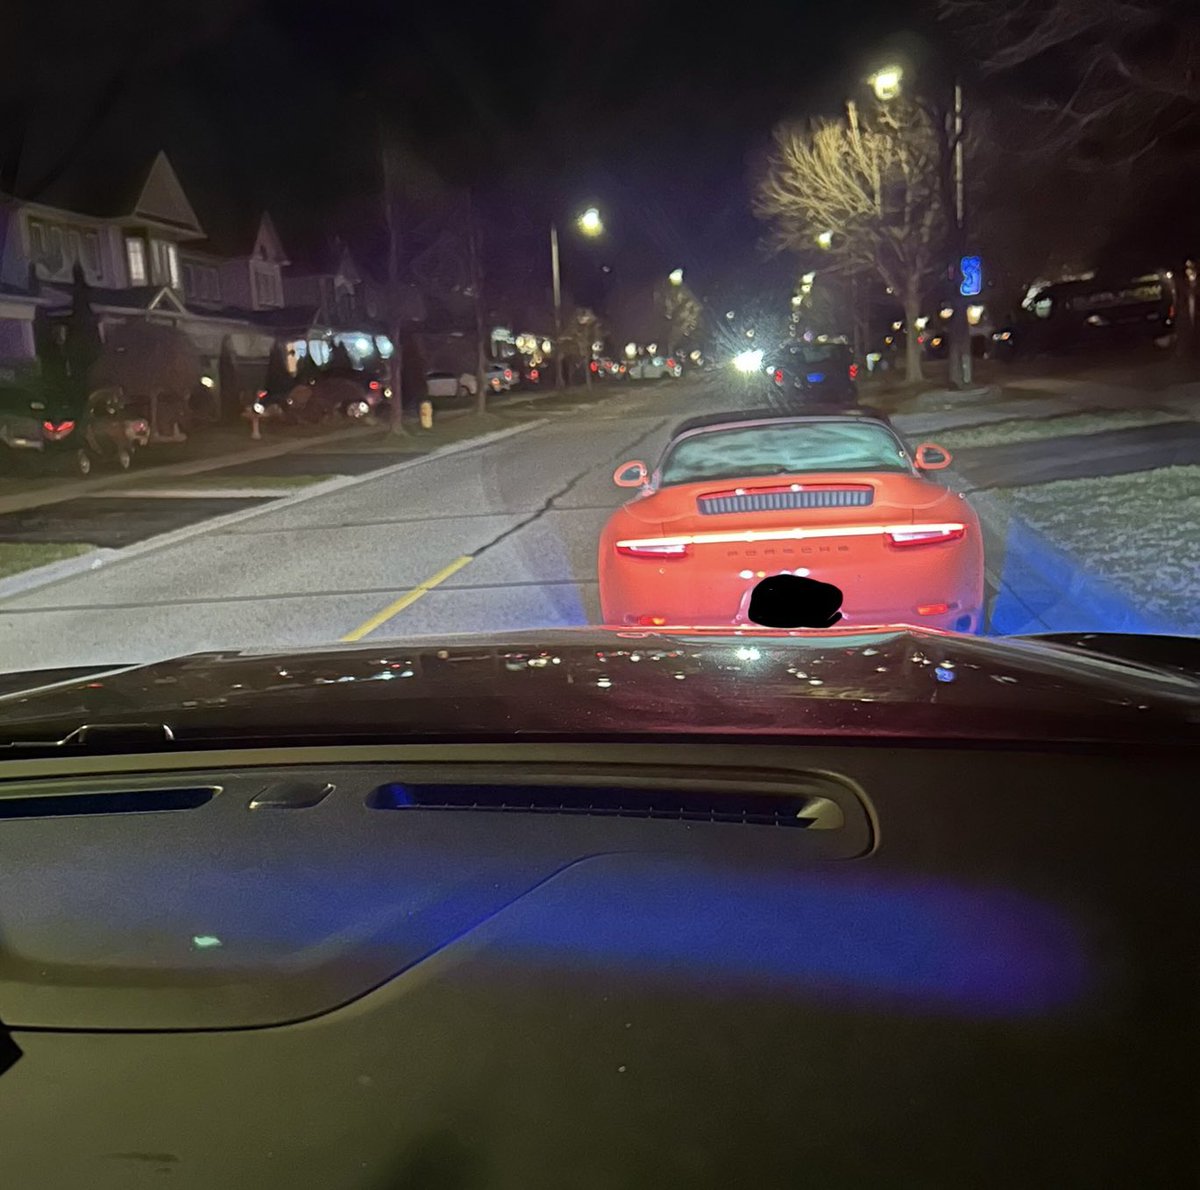 125 km/hr on Ashburn Rd in @TownofWhitby - a posted 60 zone - means someone is without their car for 14 days, and loses their licence for 30… absolutely unacceptable. #RoadSafety ^bb